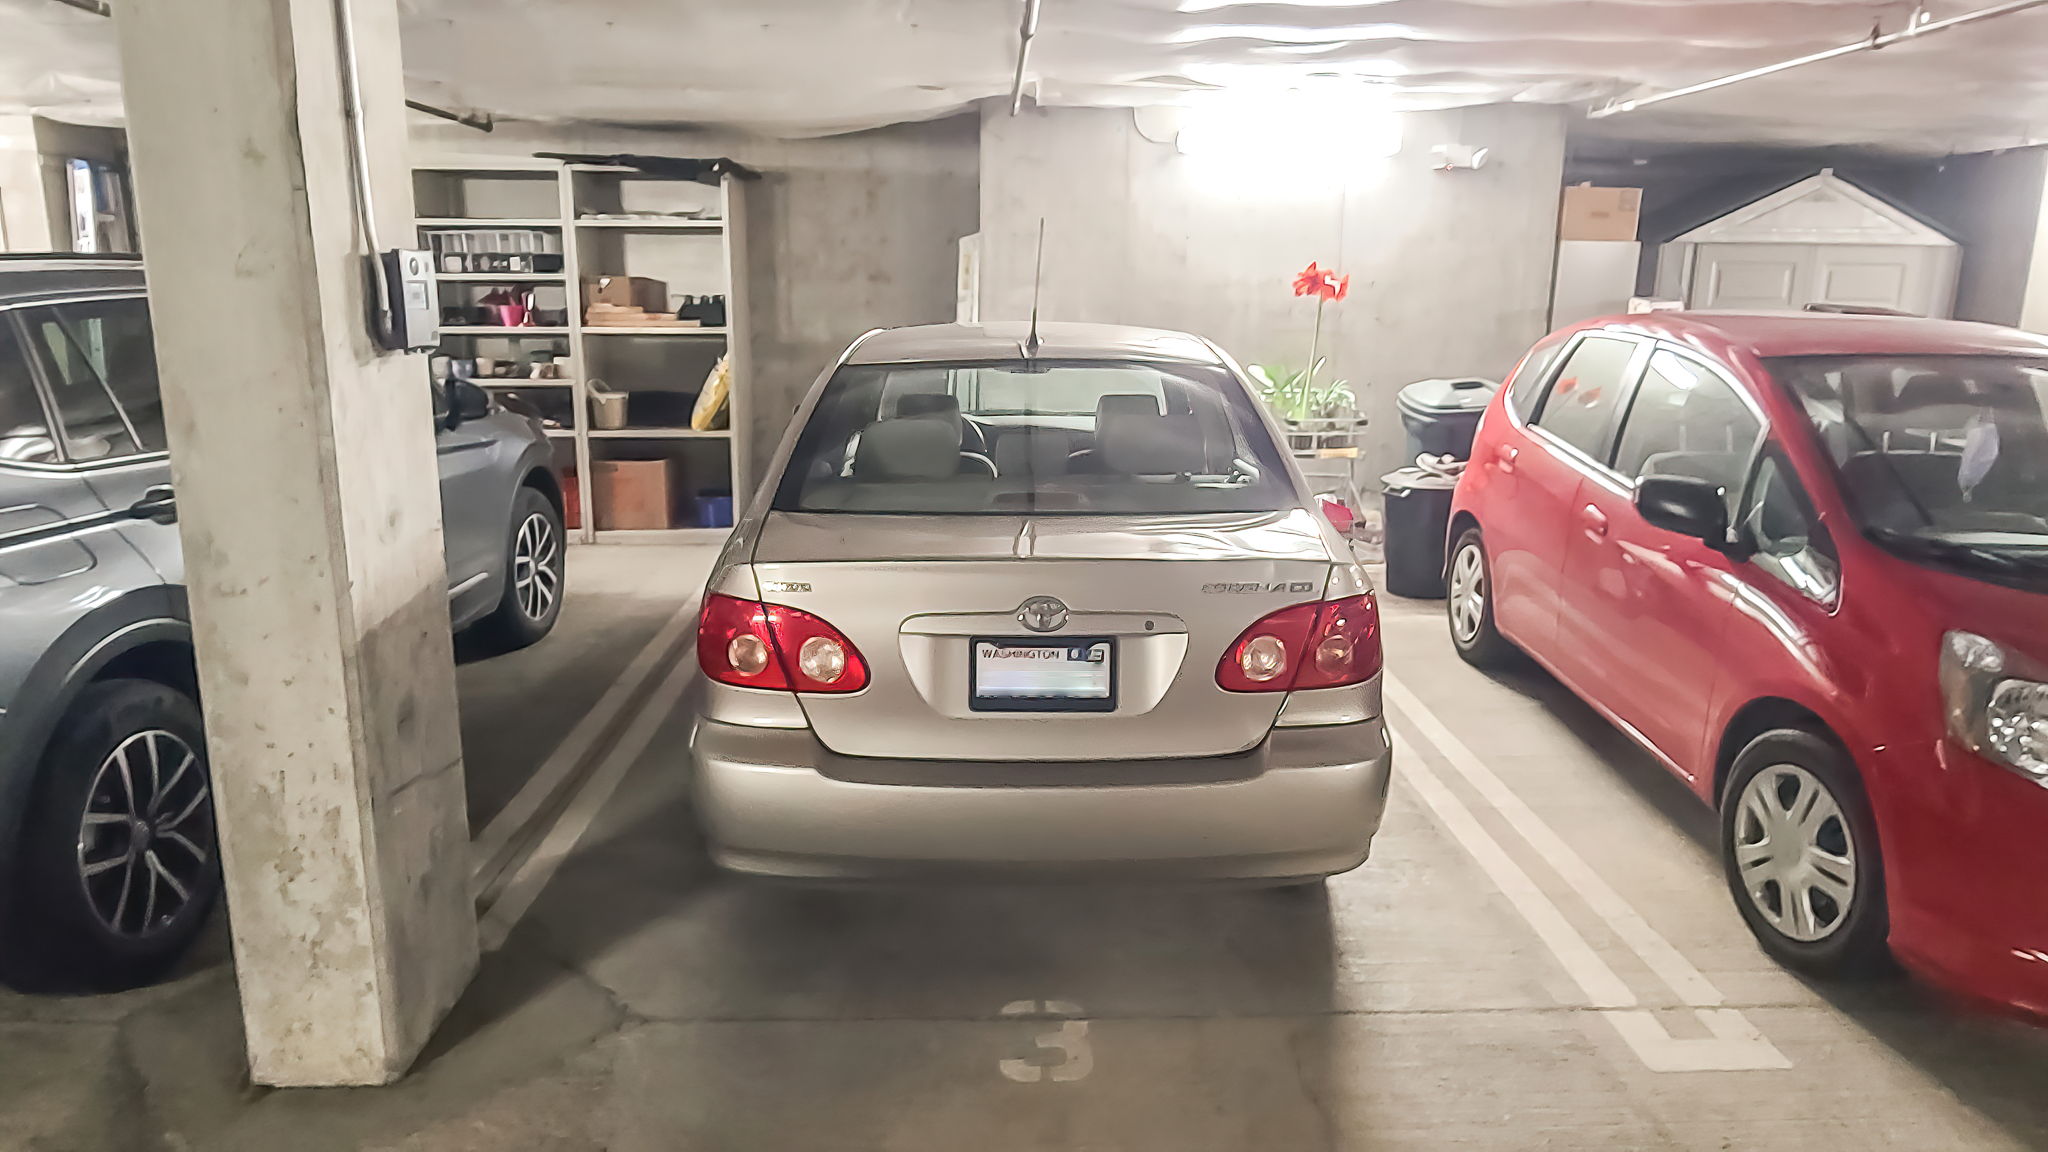 Parking space #3 has extra room for some additional storage, and best of all it’s close to the unit and has STRAIGHT access from the garage door, making it the easiest possible parking space you can hope for! ZERO steps from the car to your doorstep!